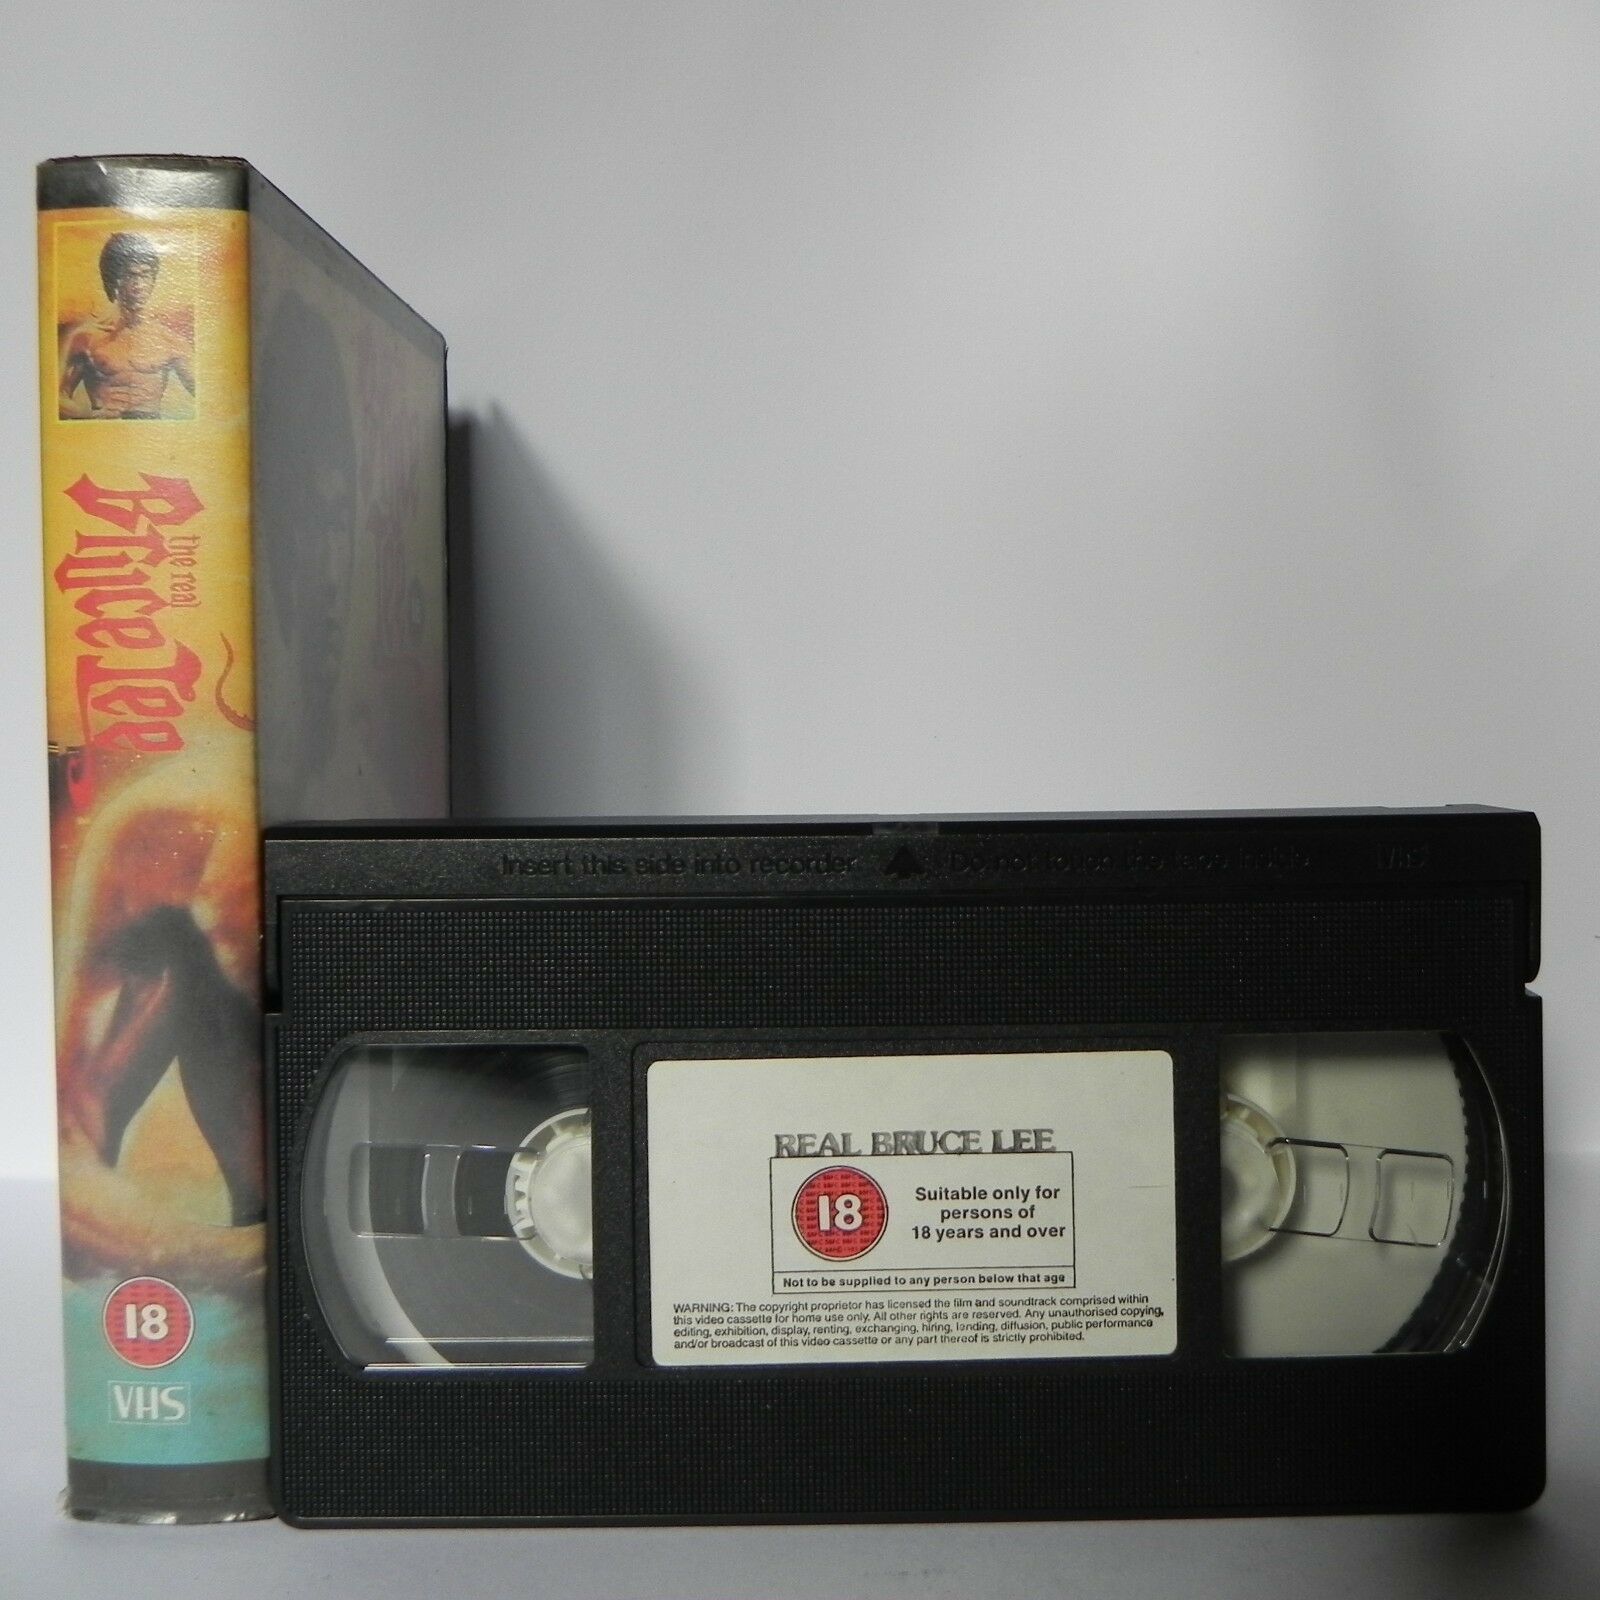 The Real Bruce Lee - Martial Arts - Early Lee Film - Classic - Cert (18) - VHS-